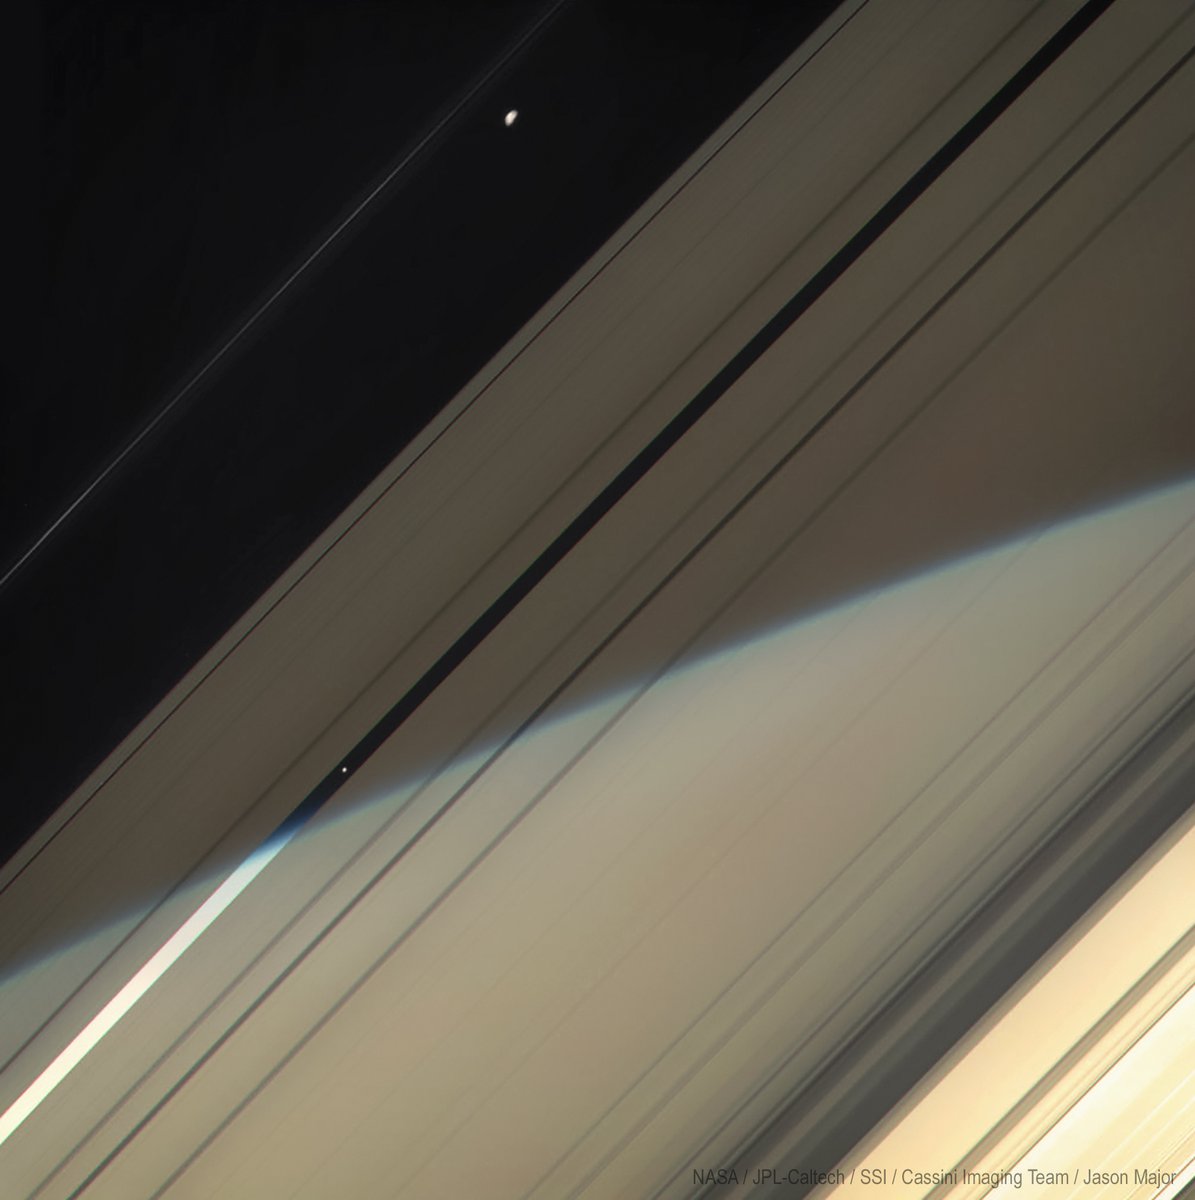 Saturn's moons Prometheus (top) and Pan (lower left of center) orbiting Saturn inside the ring plane, imaged by NASA's Cassini spacecraft on April 25, 2008 #OTD. Saturn's sunlit side can be seen in the background at the bottom through the rings. 🪐